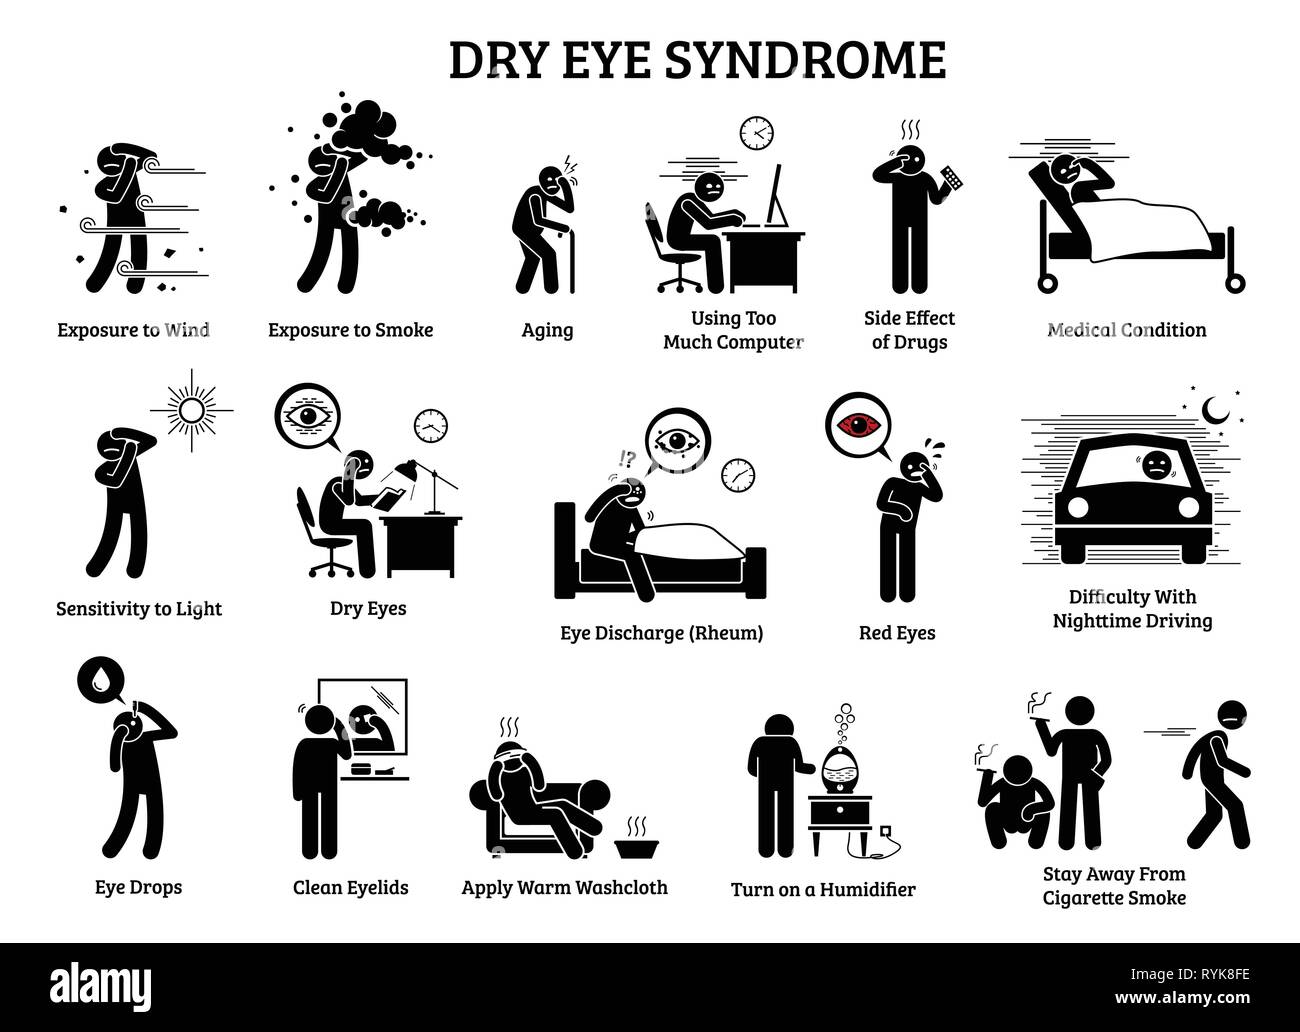 Dry Eye Syndrome. Icons illustrations depict  the symptoms, causes, effects, and home remedies for dry eye health problem. Stock Vector